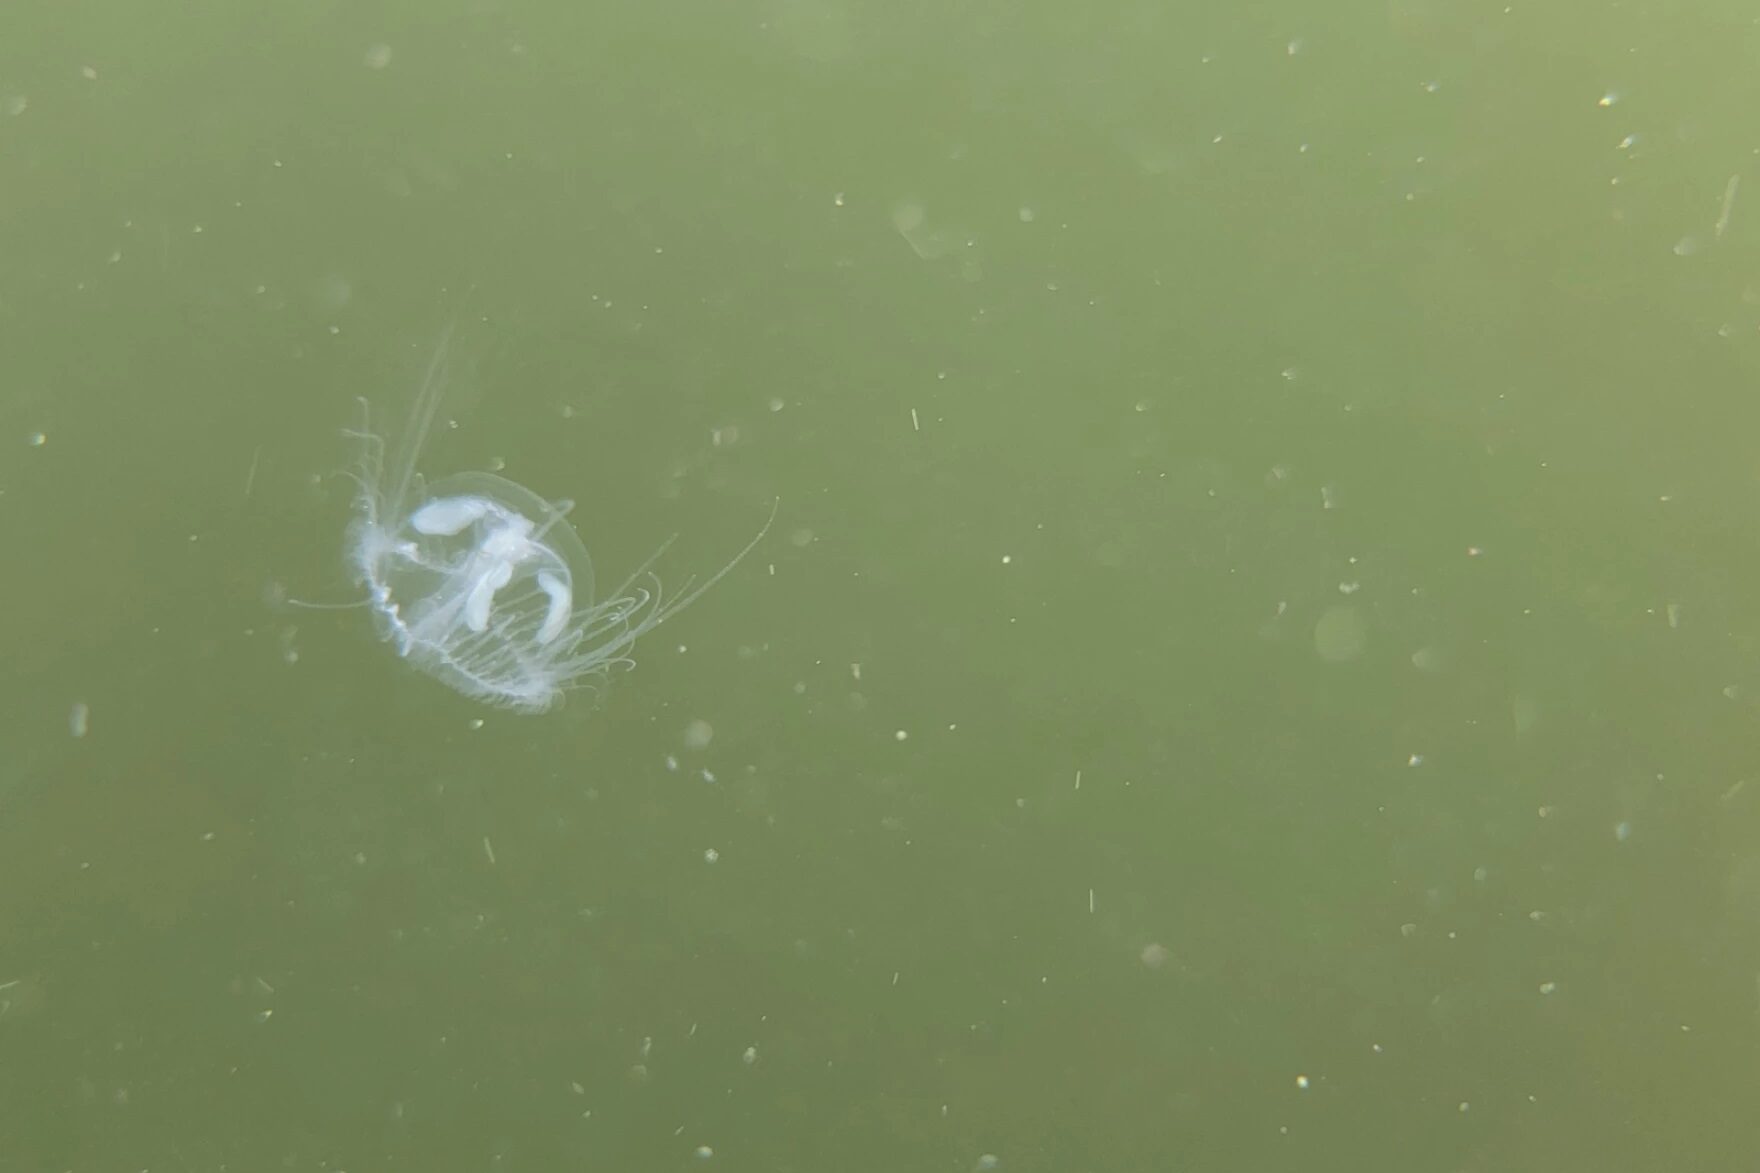 A white jellyfish floats in green water.